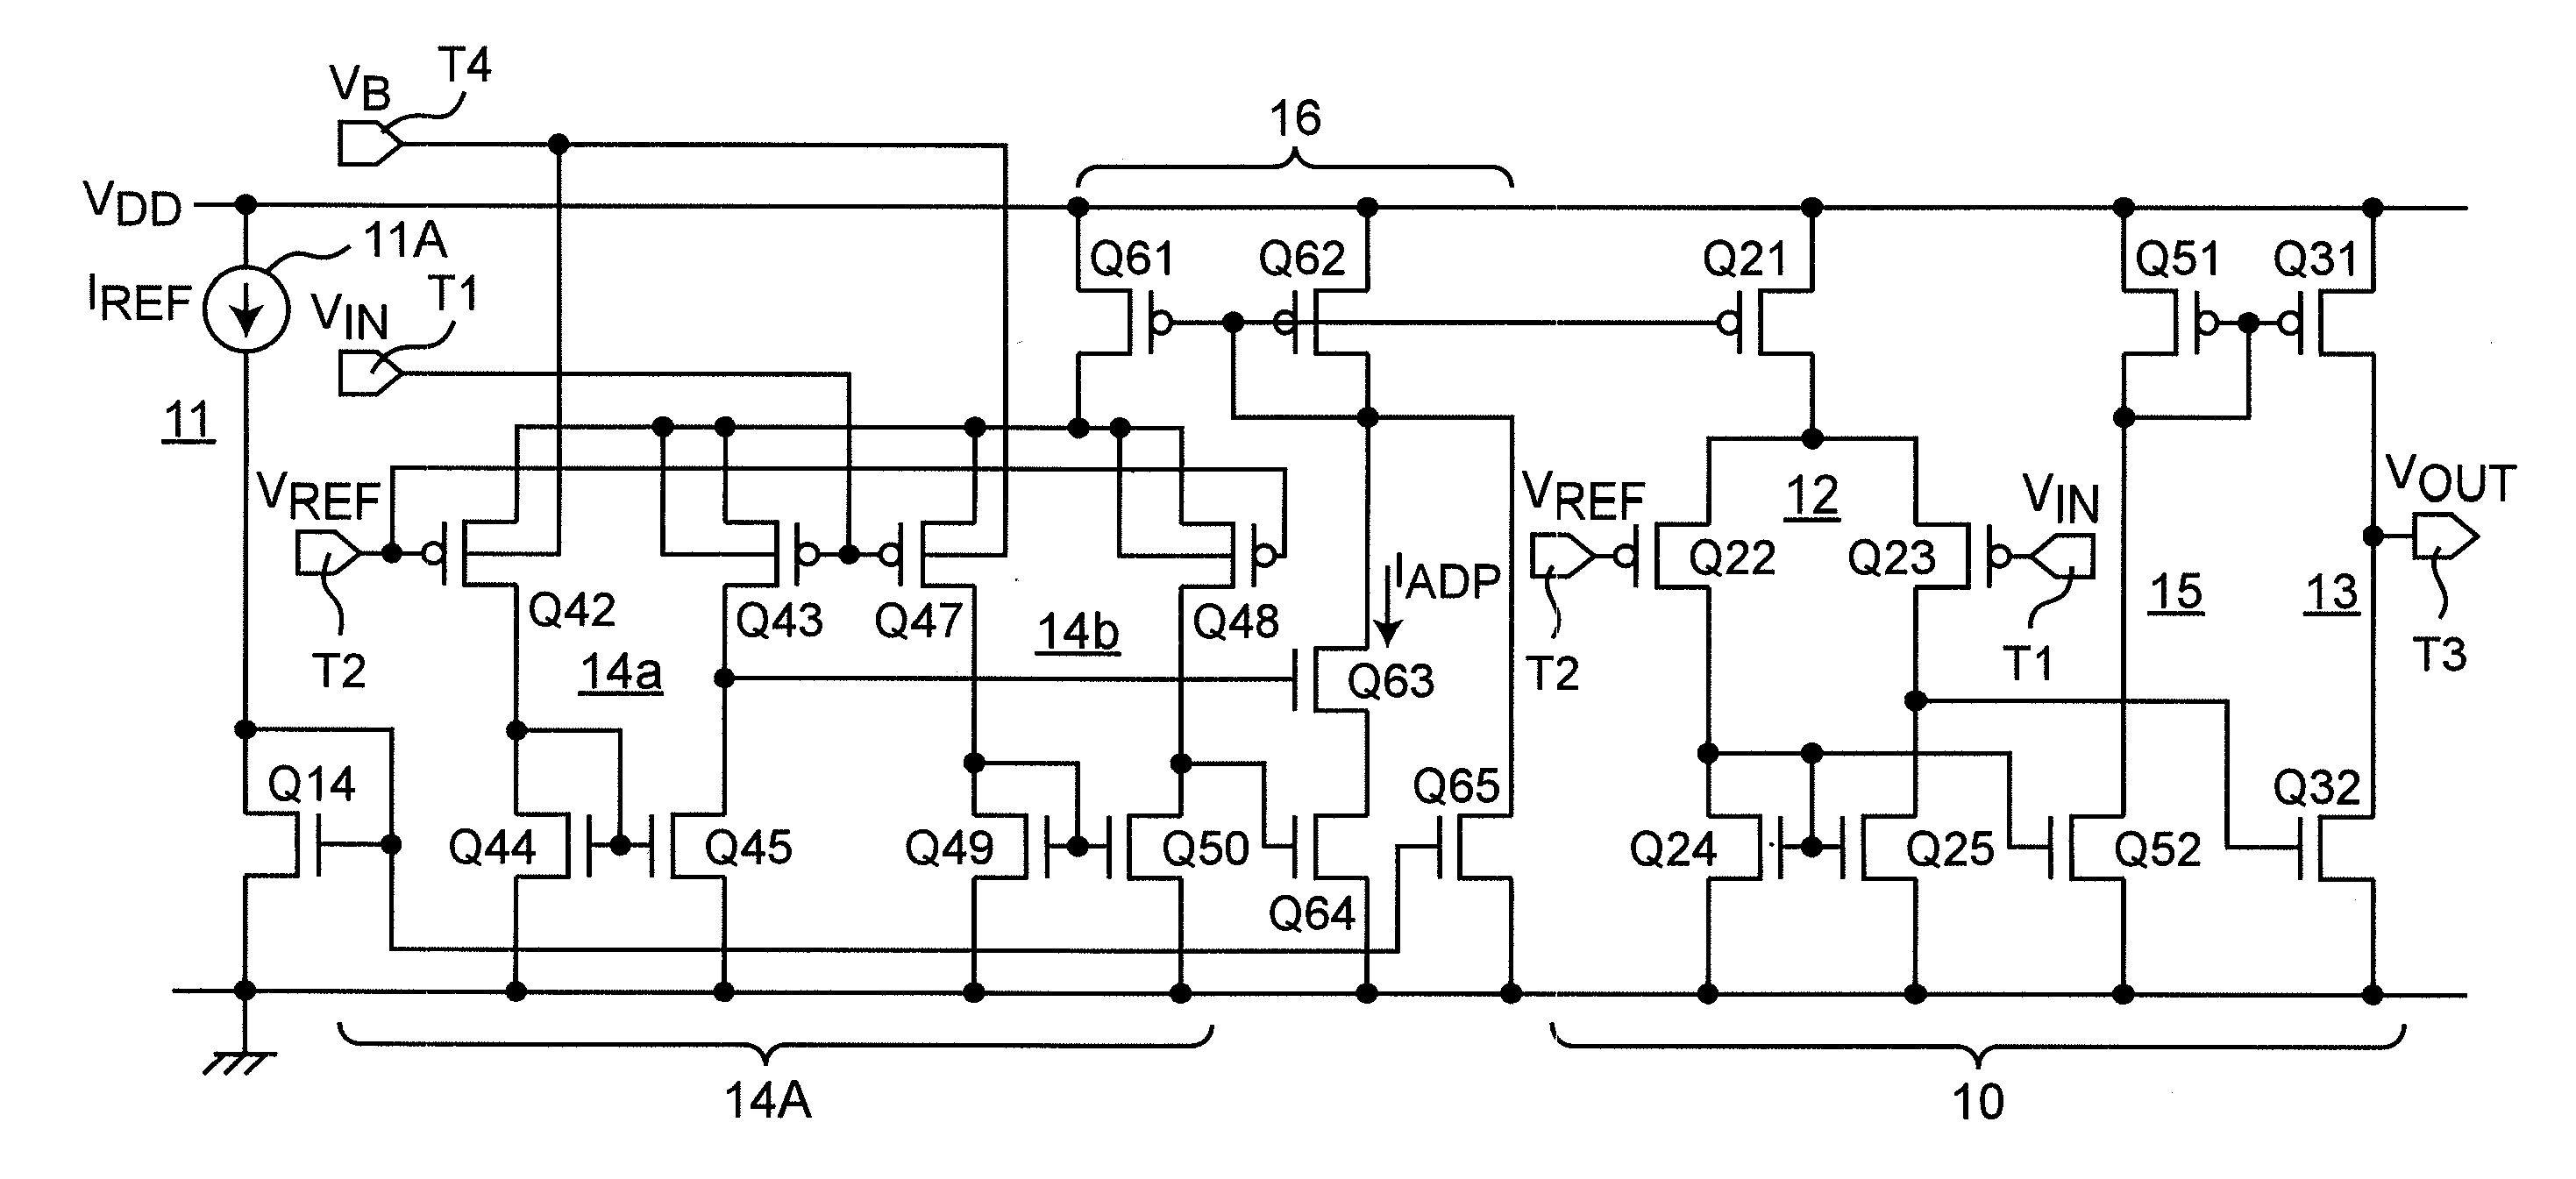 Comparator circuit provided with differential amplifier making logical judgment by comparing input voltage with reference voltage